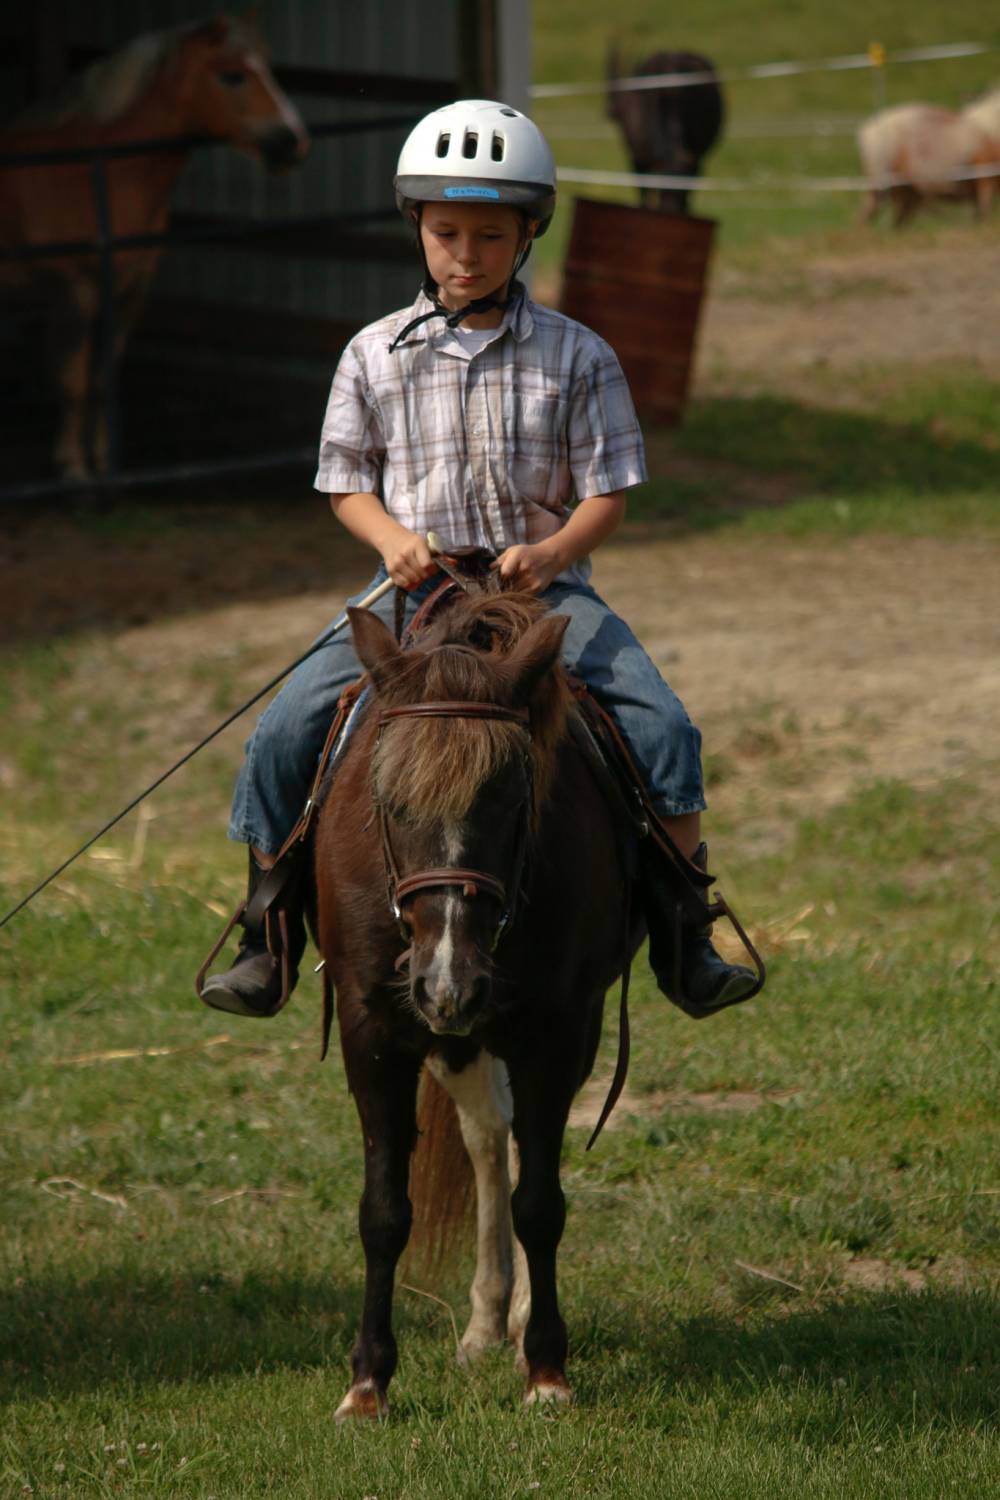 TOP PENNSYLVANIA COED CAMP: Fairview Farm and Guest Ranch - Rough Riders Girl s Camp is a Top Coed Summer Camp located in Granville Summit Pennsylvania offering many fun and enriching Coed and other camp programs. 